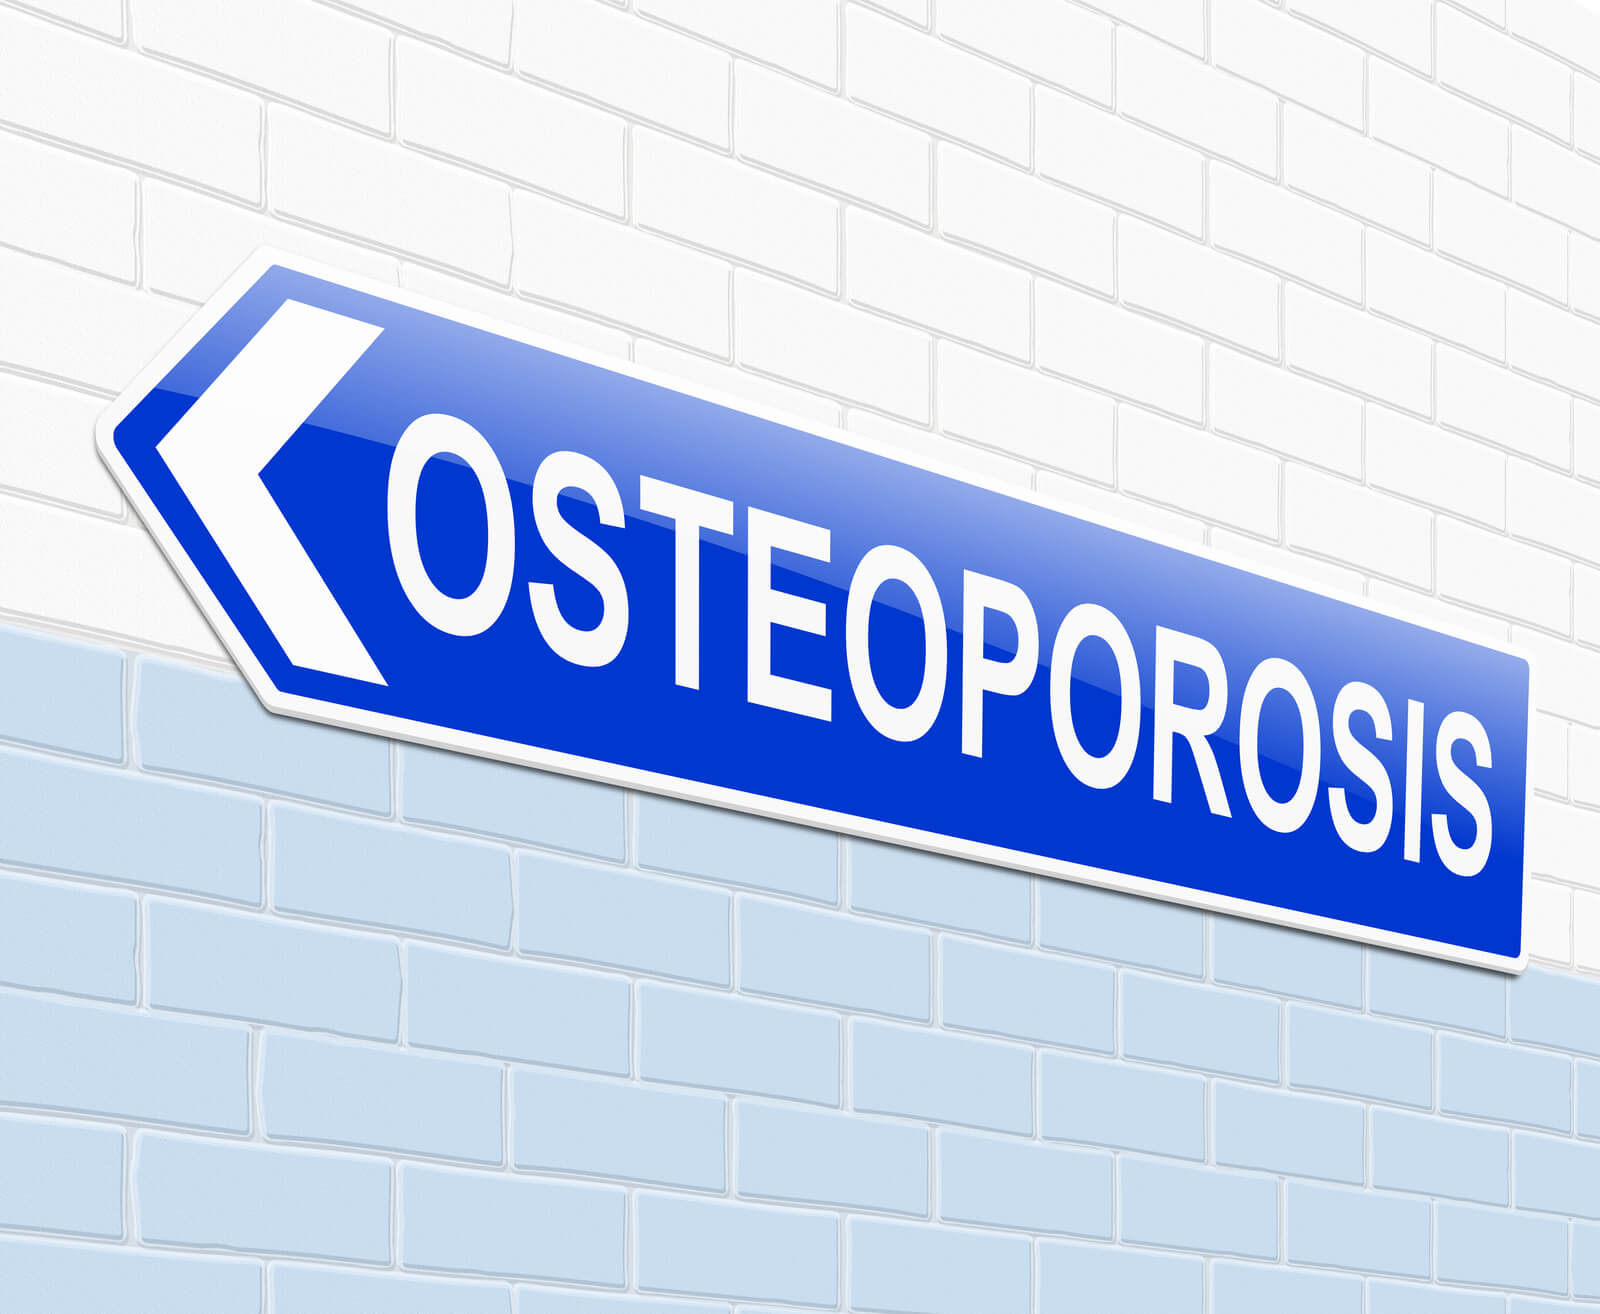 Osteoporosis sign concept art.